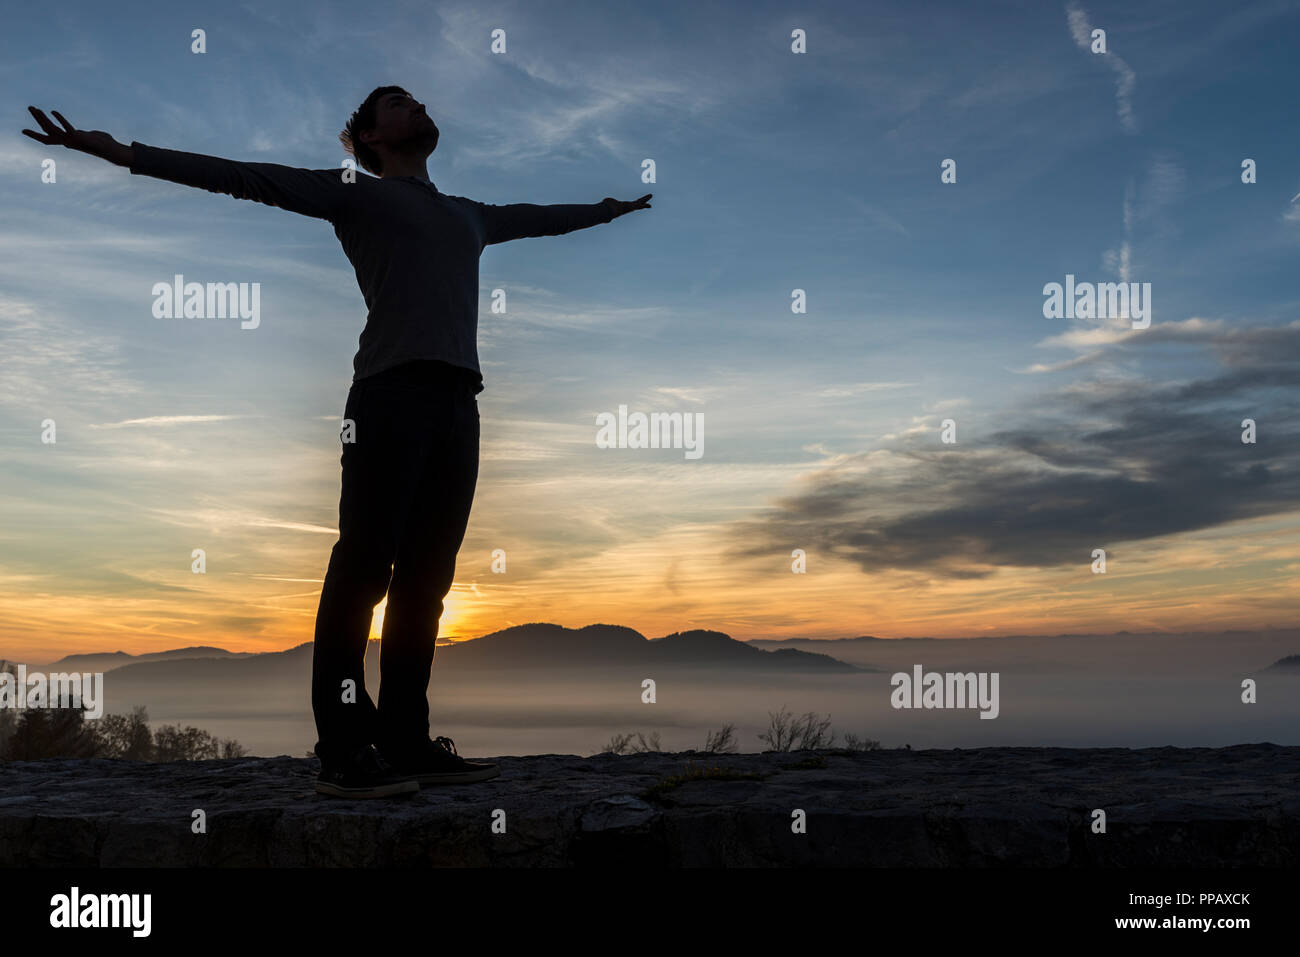 Man in casual clothes with his arms spread widely standing outdoors silhouetted against a sunrise with the fiery sun peeping over mountains. Stock Photo